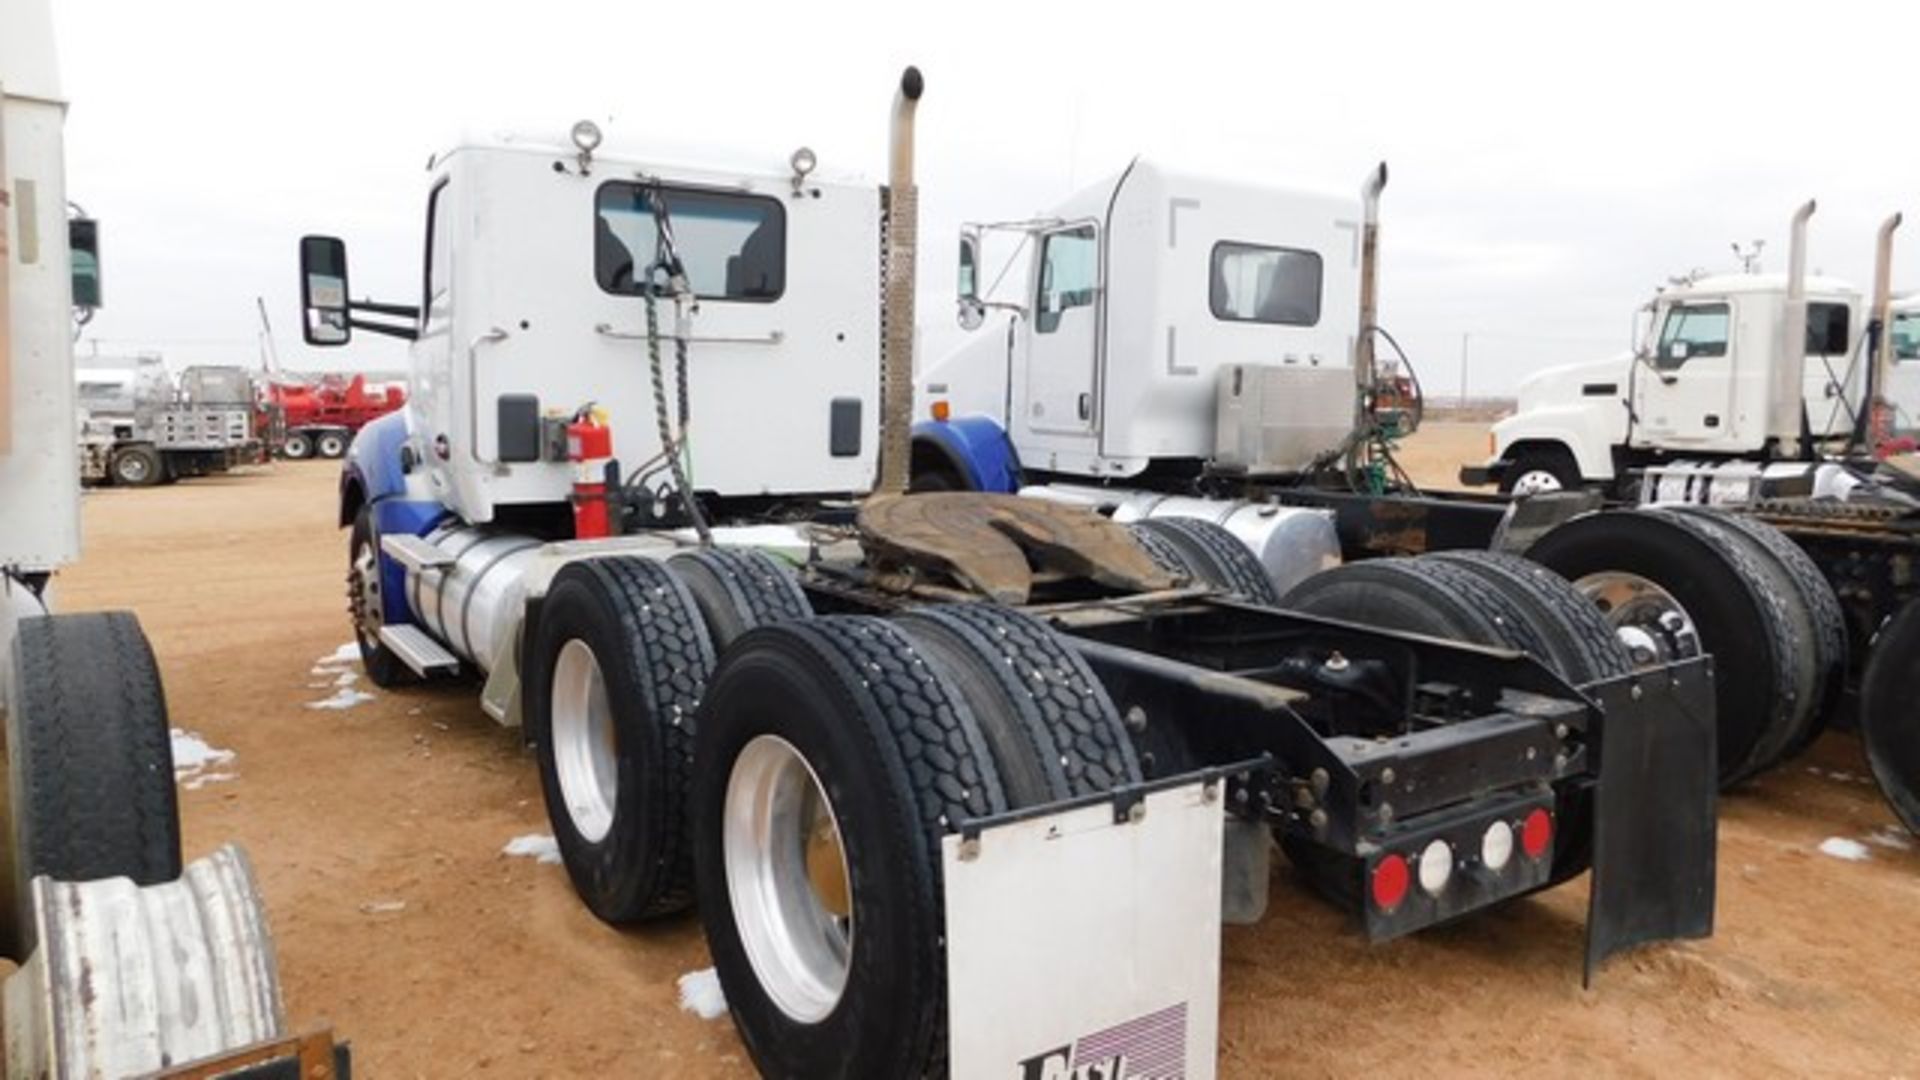 Located in YARD 1 - Midland, TX (6293) (X) 2015 KENWORTH T680 T/A DAY CAB HAUL T - Image 4 of 8